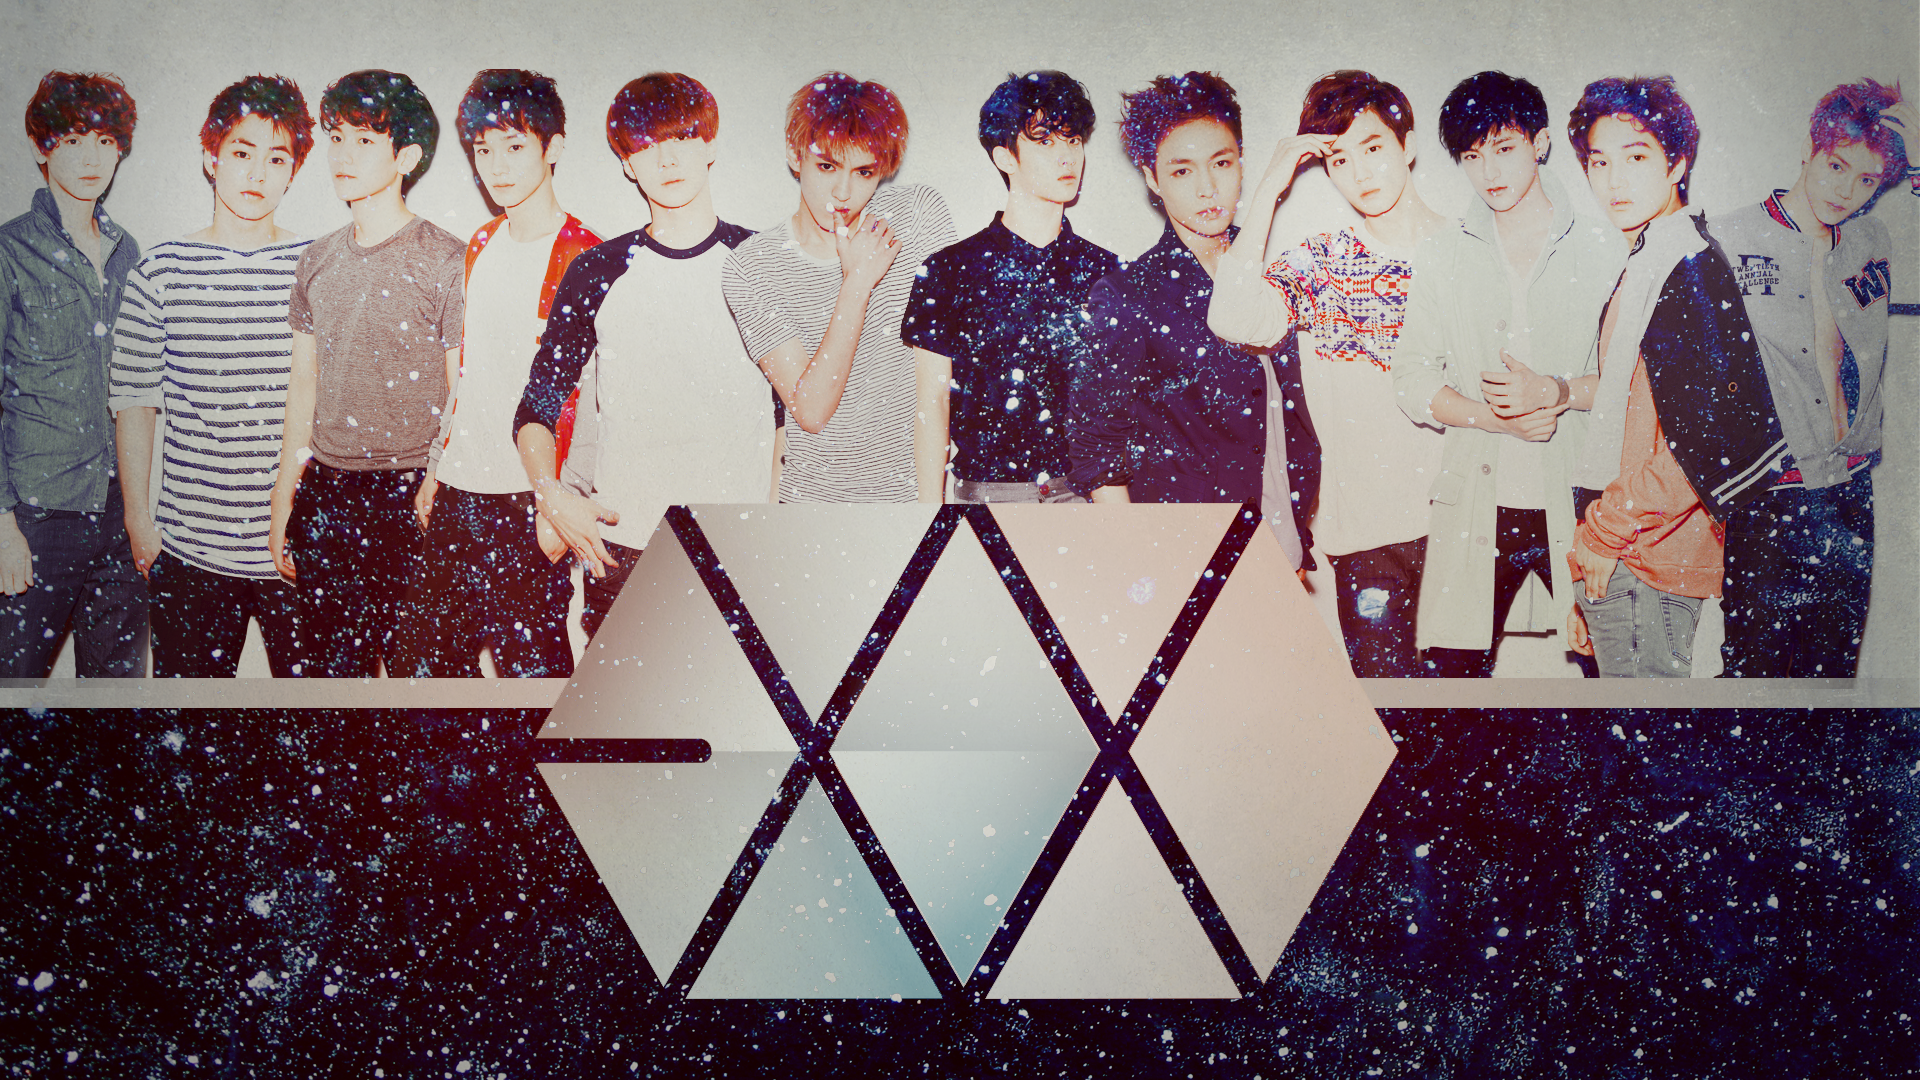 exo computer wallpaper,people,social group,team,font,event